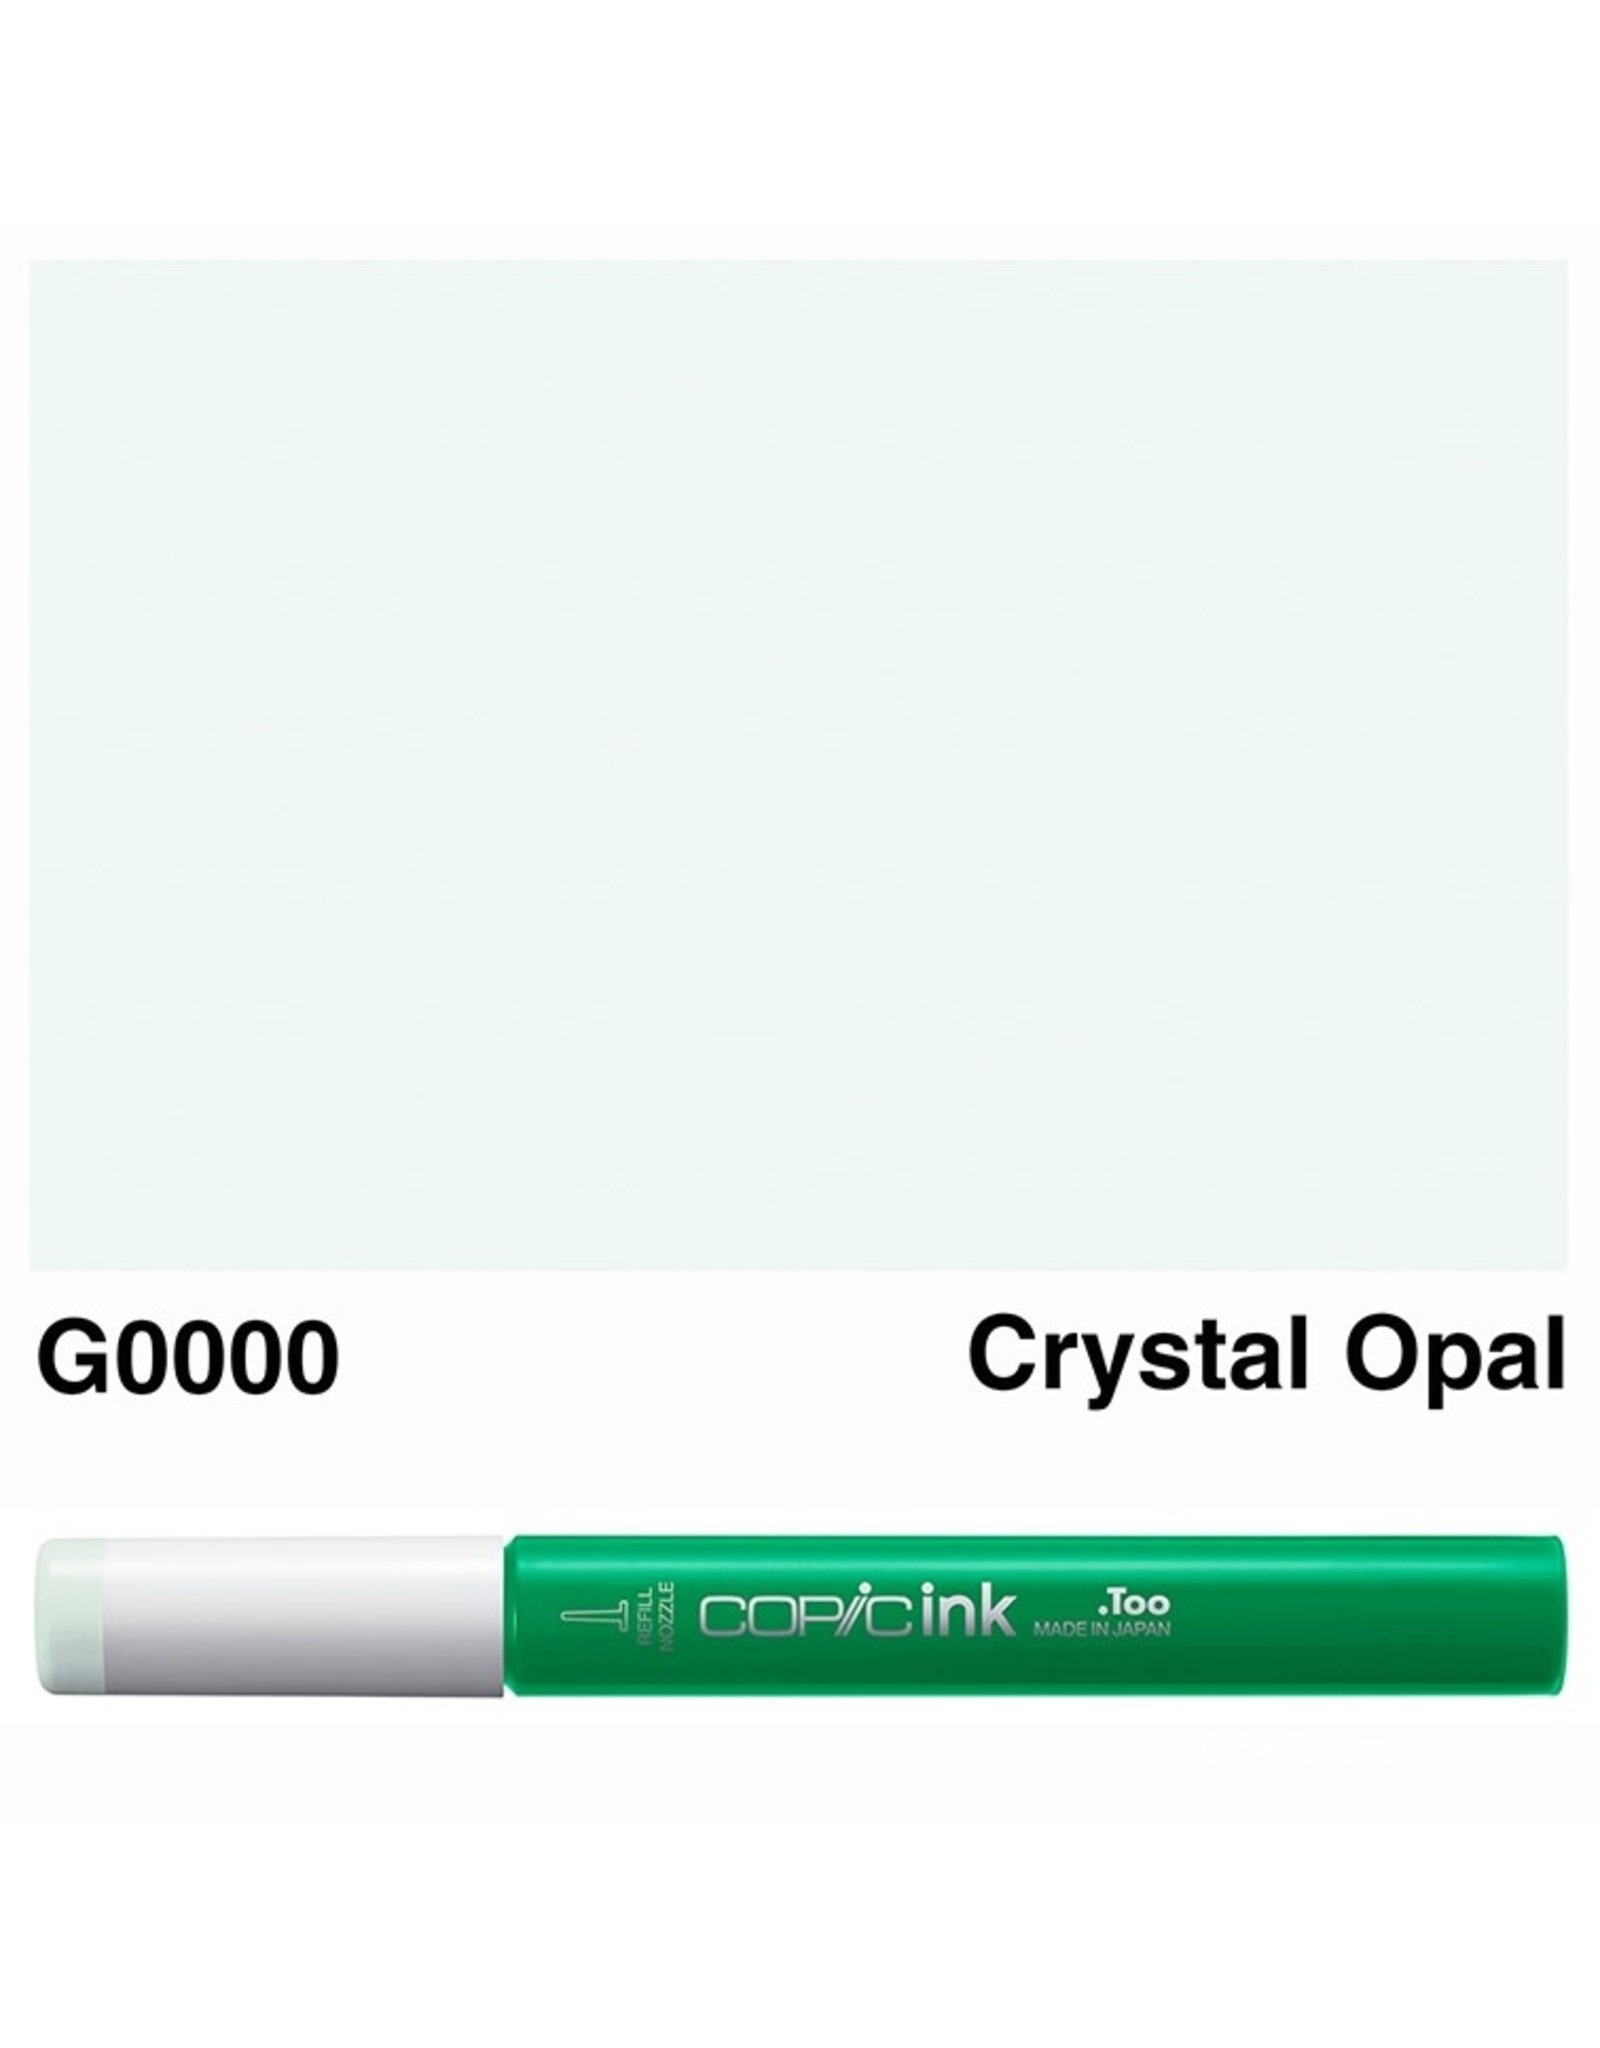 COPIC COPIC G0000 CRYSTAL OPAL REFILL